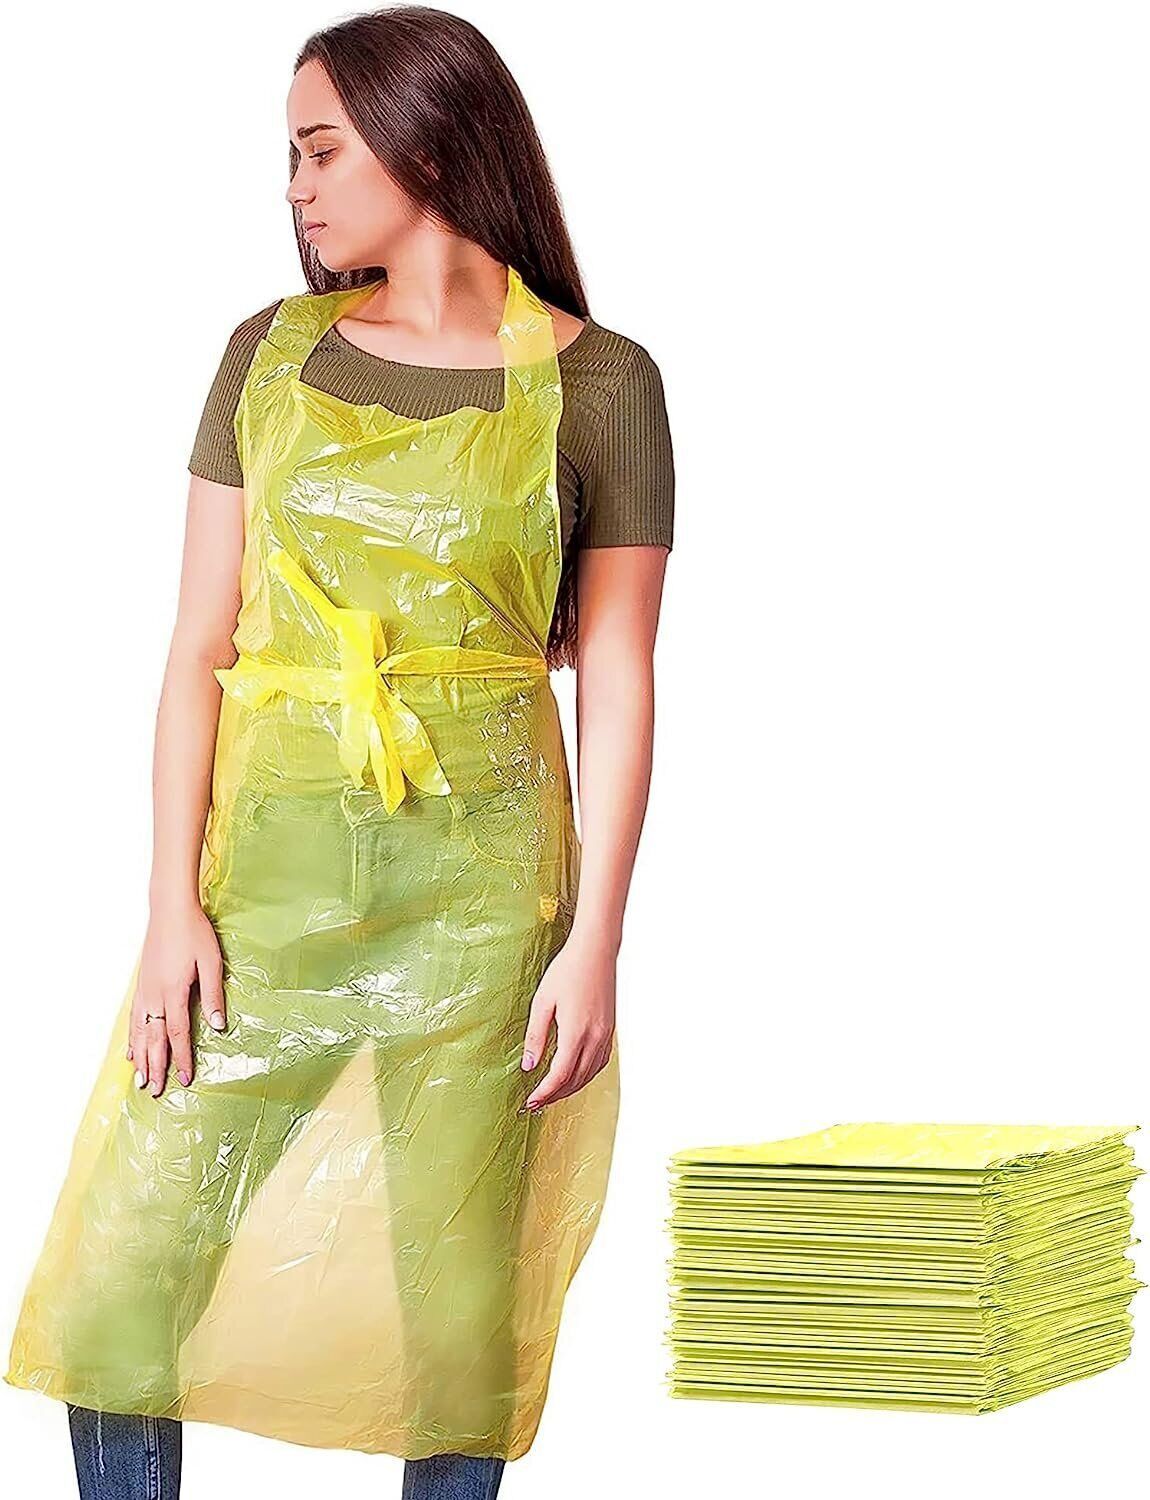 Primary image for 1000 Disposable Yellow Polyethylene Aprons 28 x 46 inches 1Mil